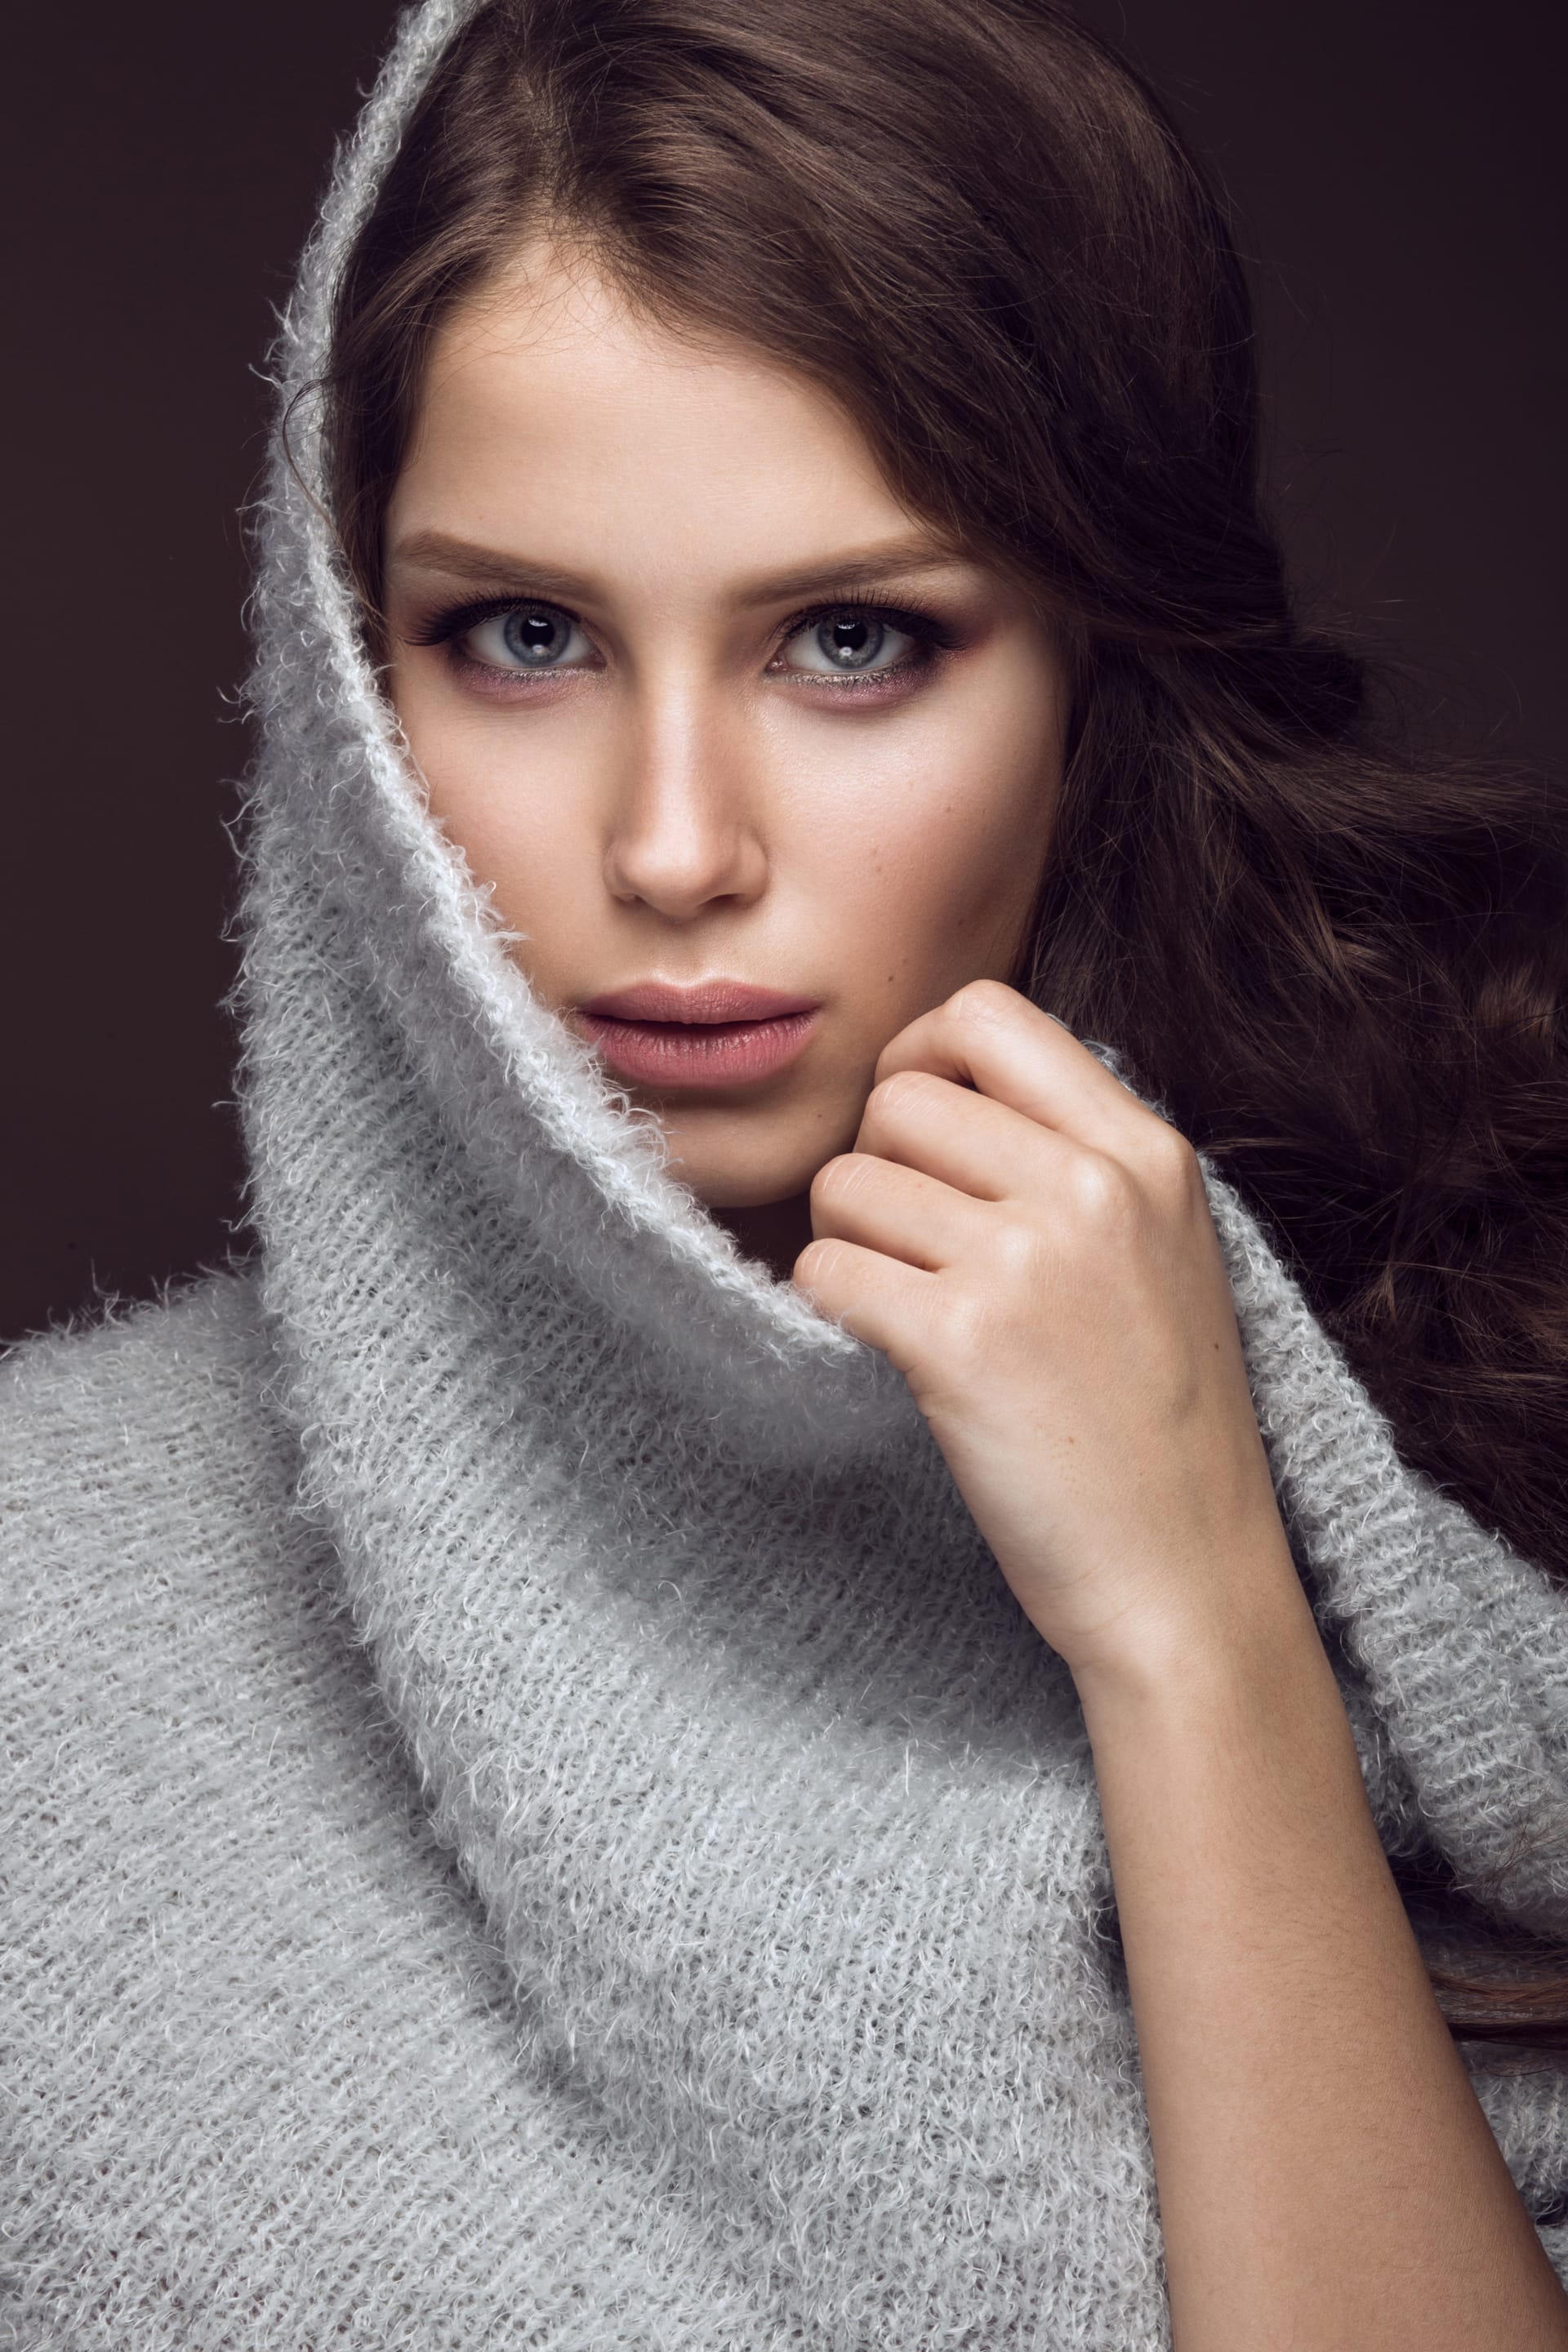 Make up warm sweater long straight hair picture